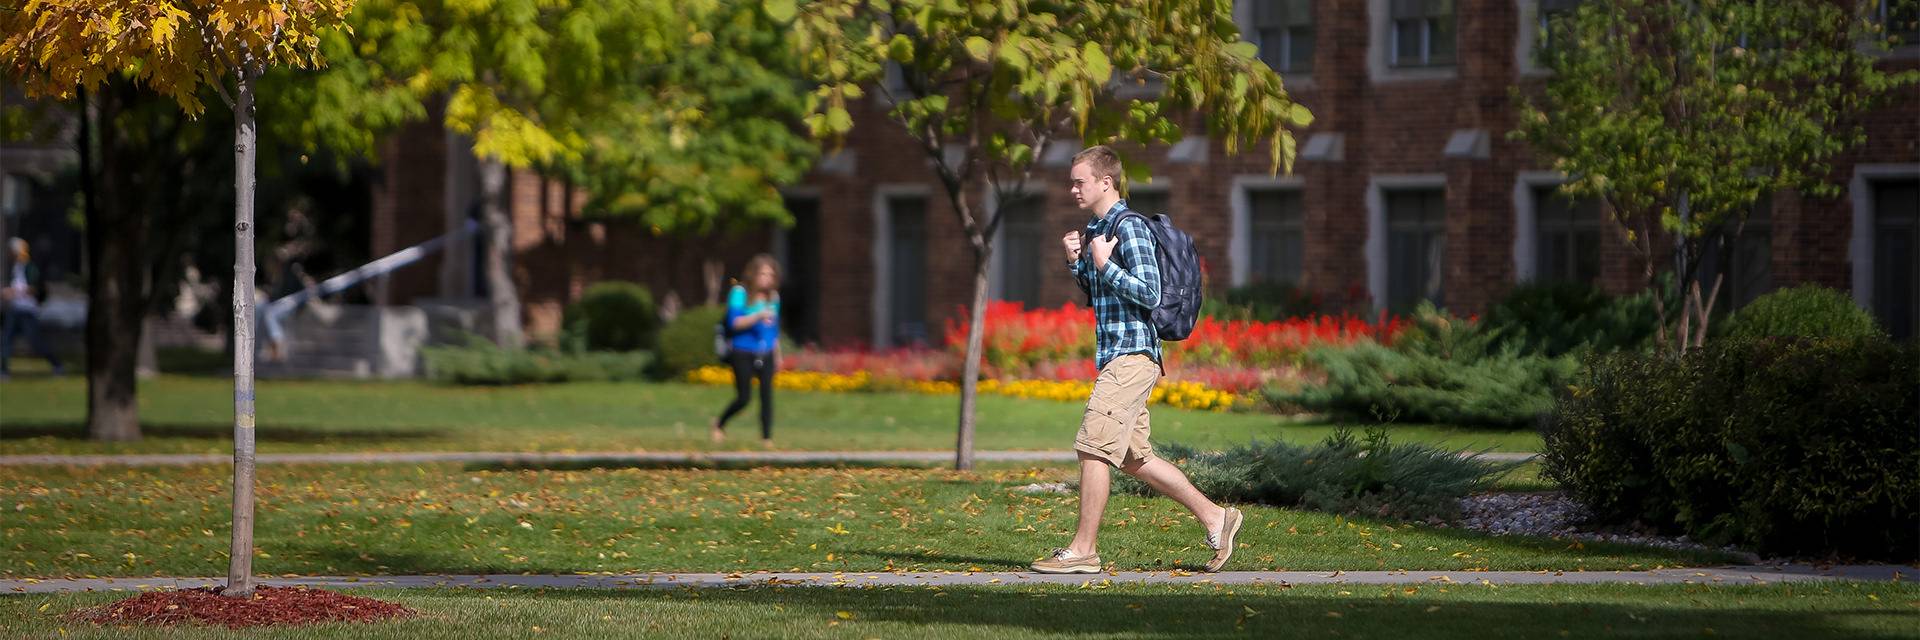 walking across campus during fall